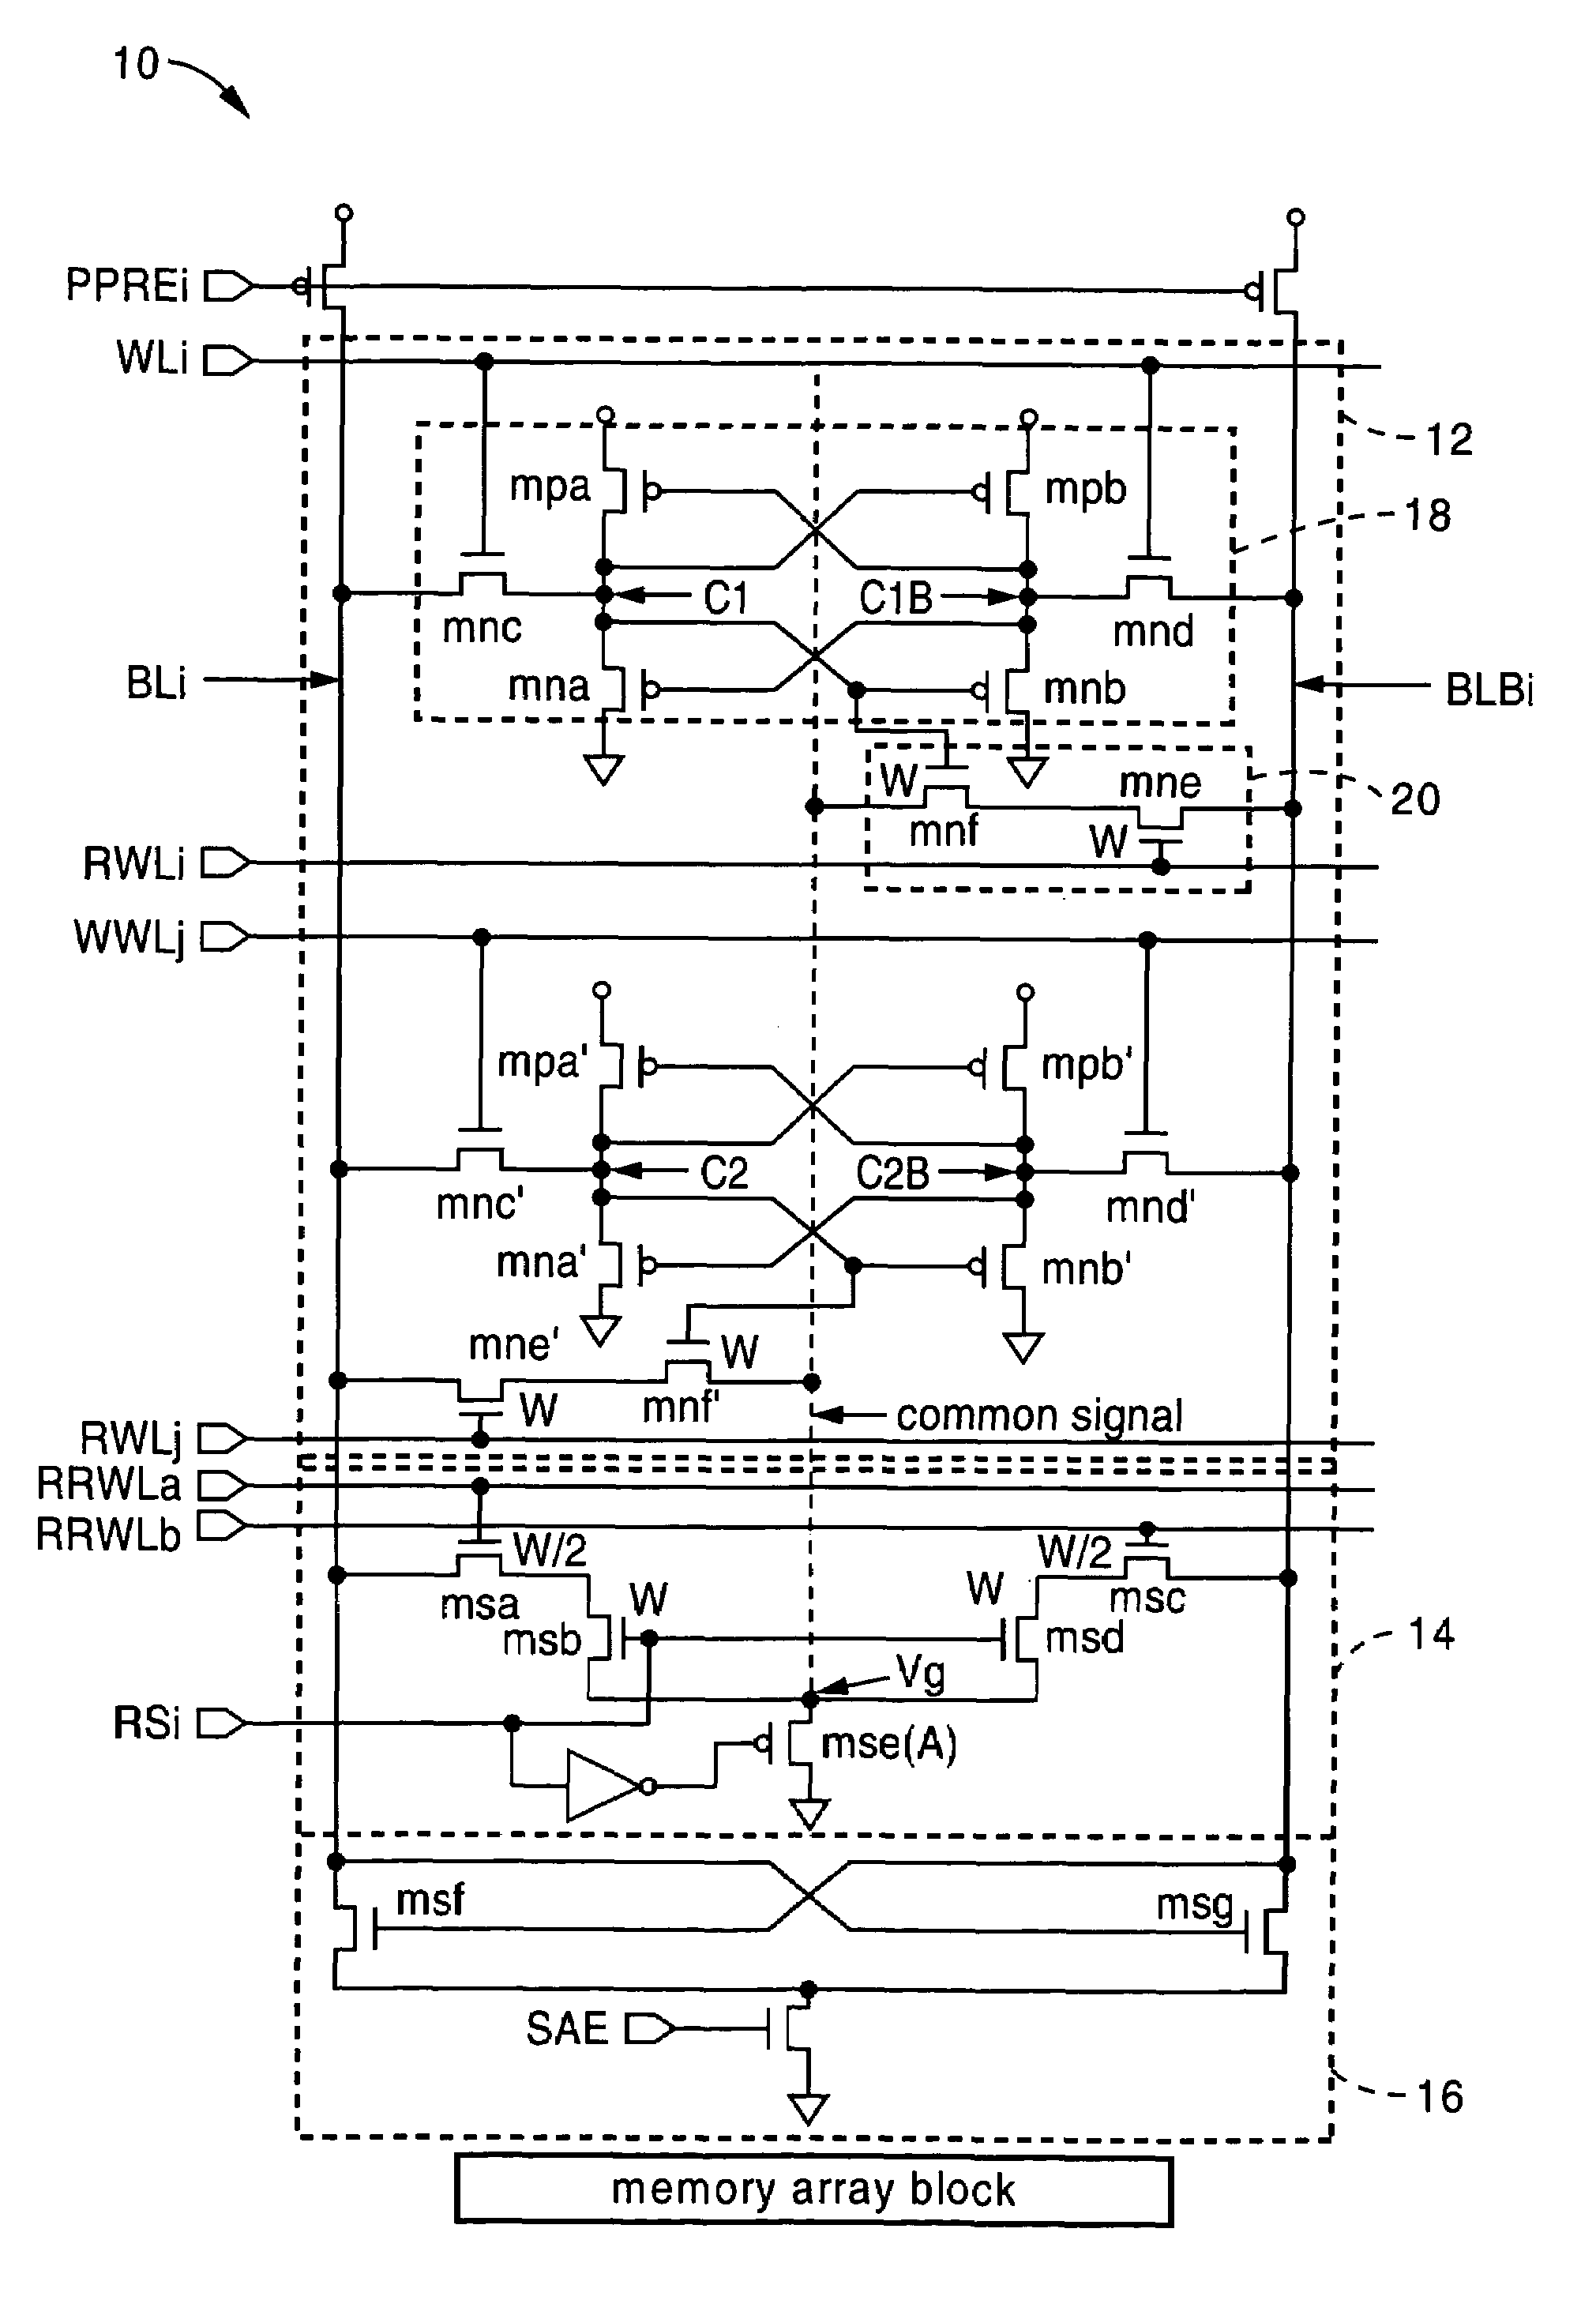 SRAM cell structure and circuits